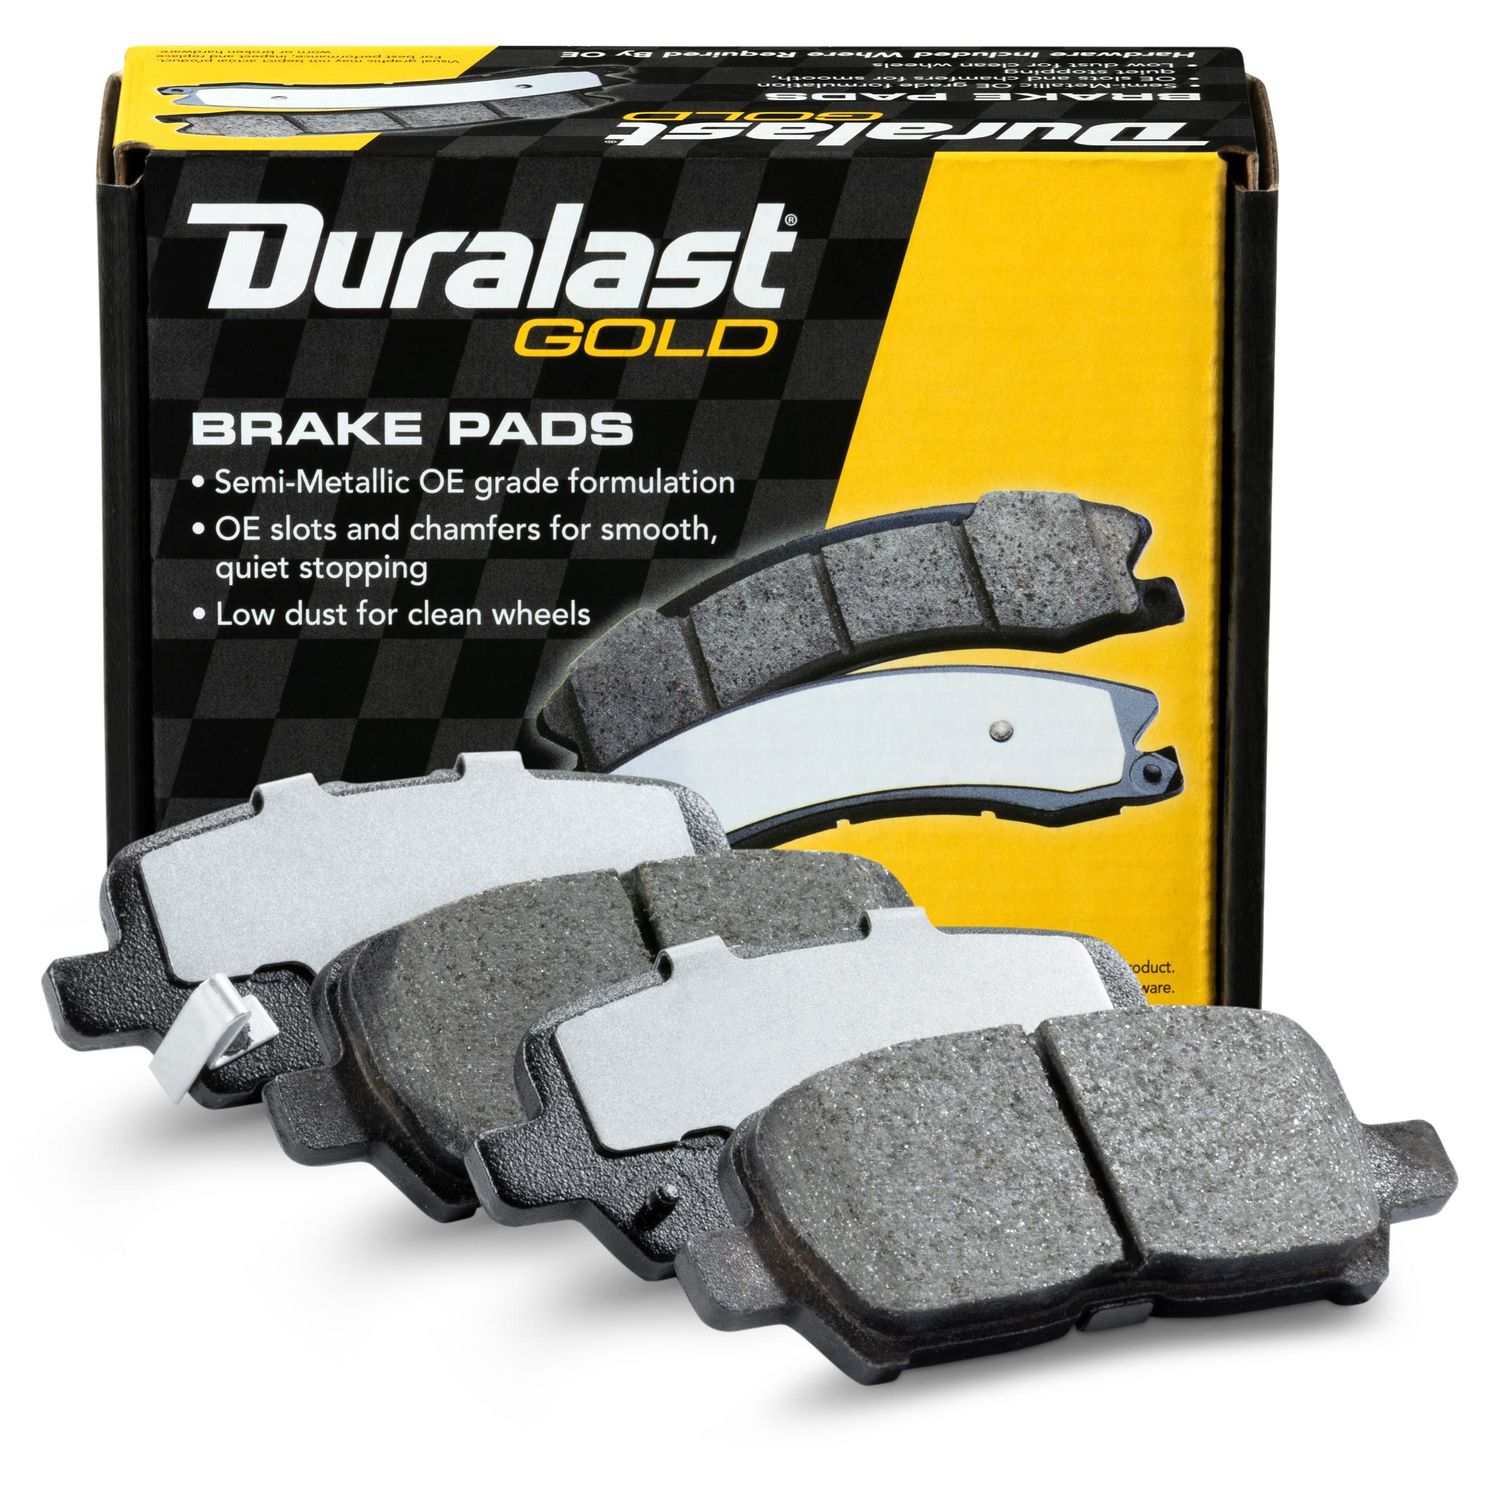 Brake Pads The Best Front And Rear Brake Pads For Cars Trucks Suvs Autozone Brake Pads Rear Brake Pads Best Brake Pads